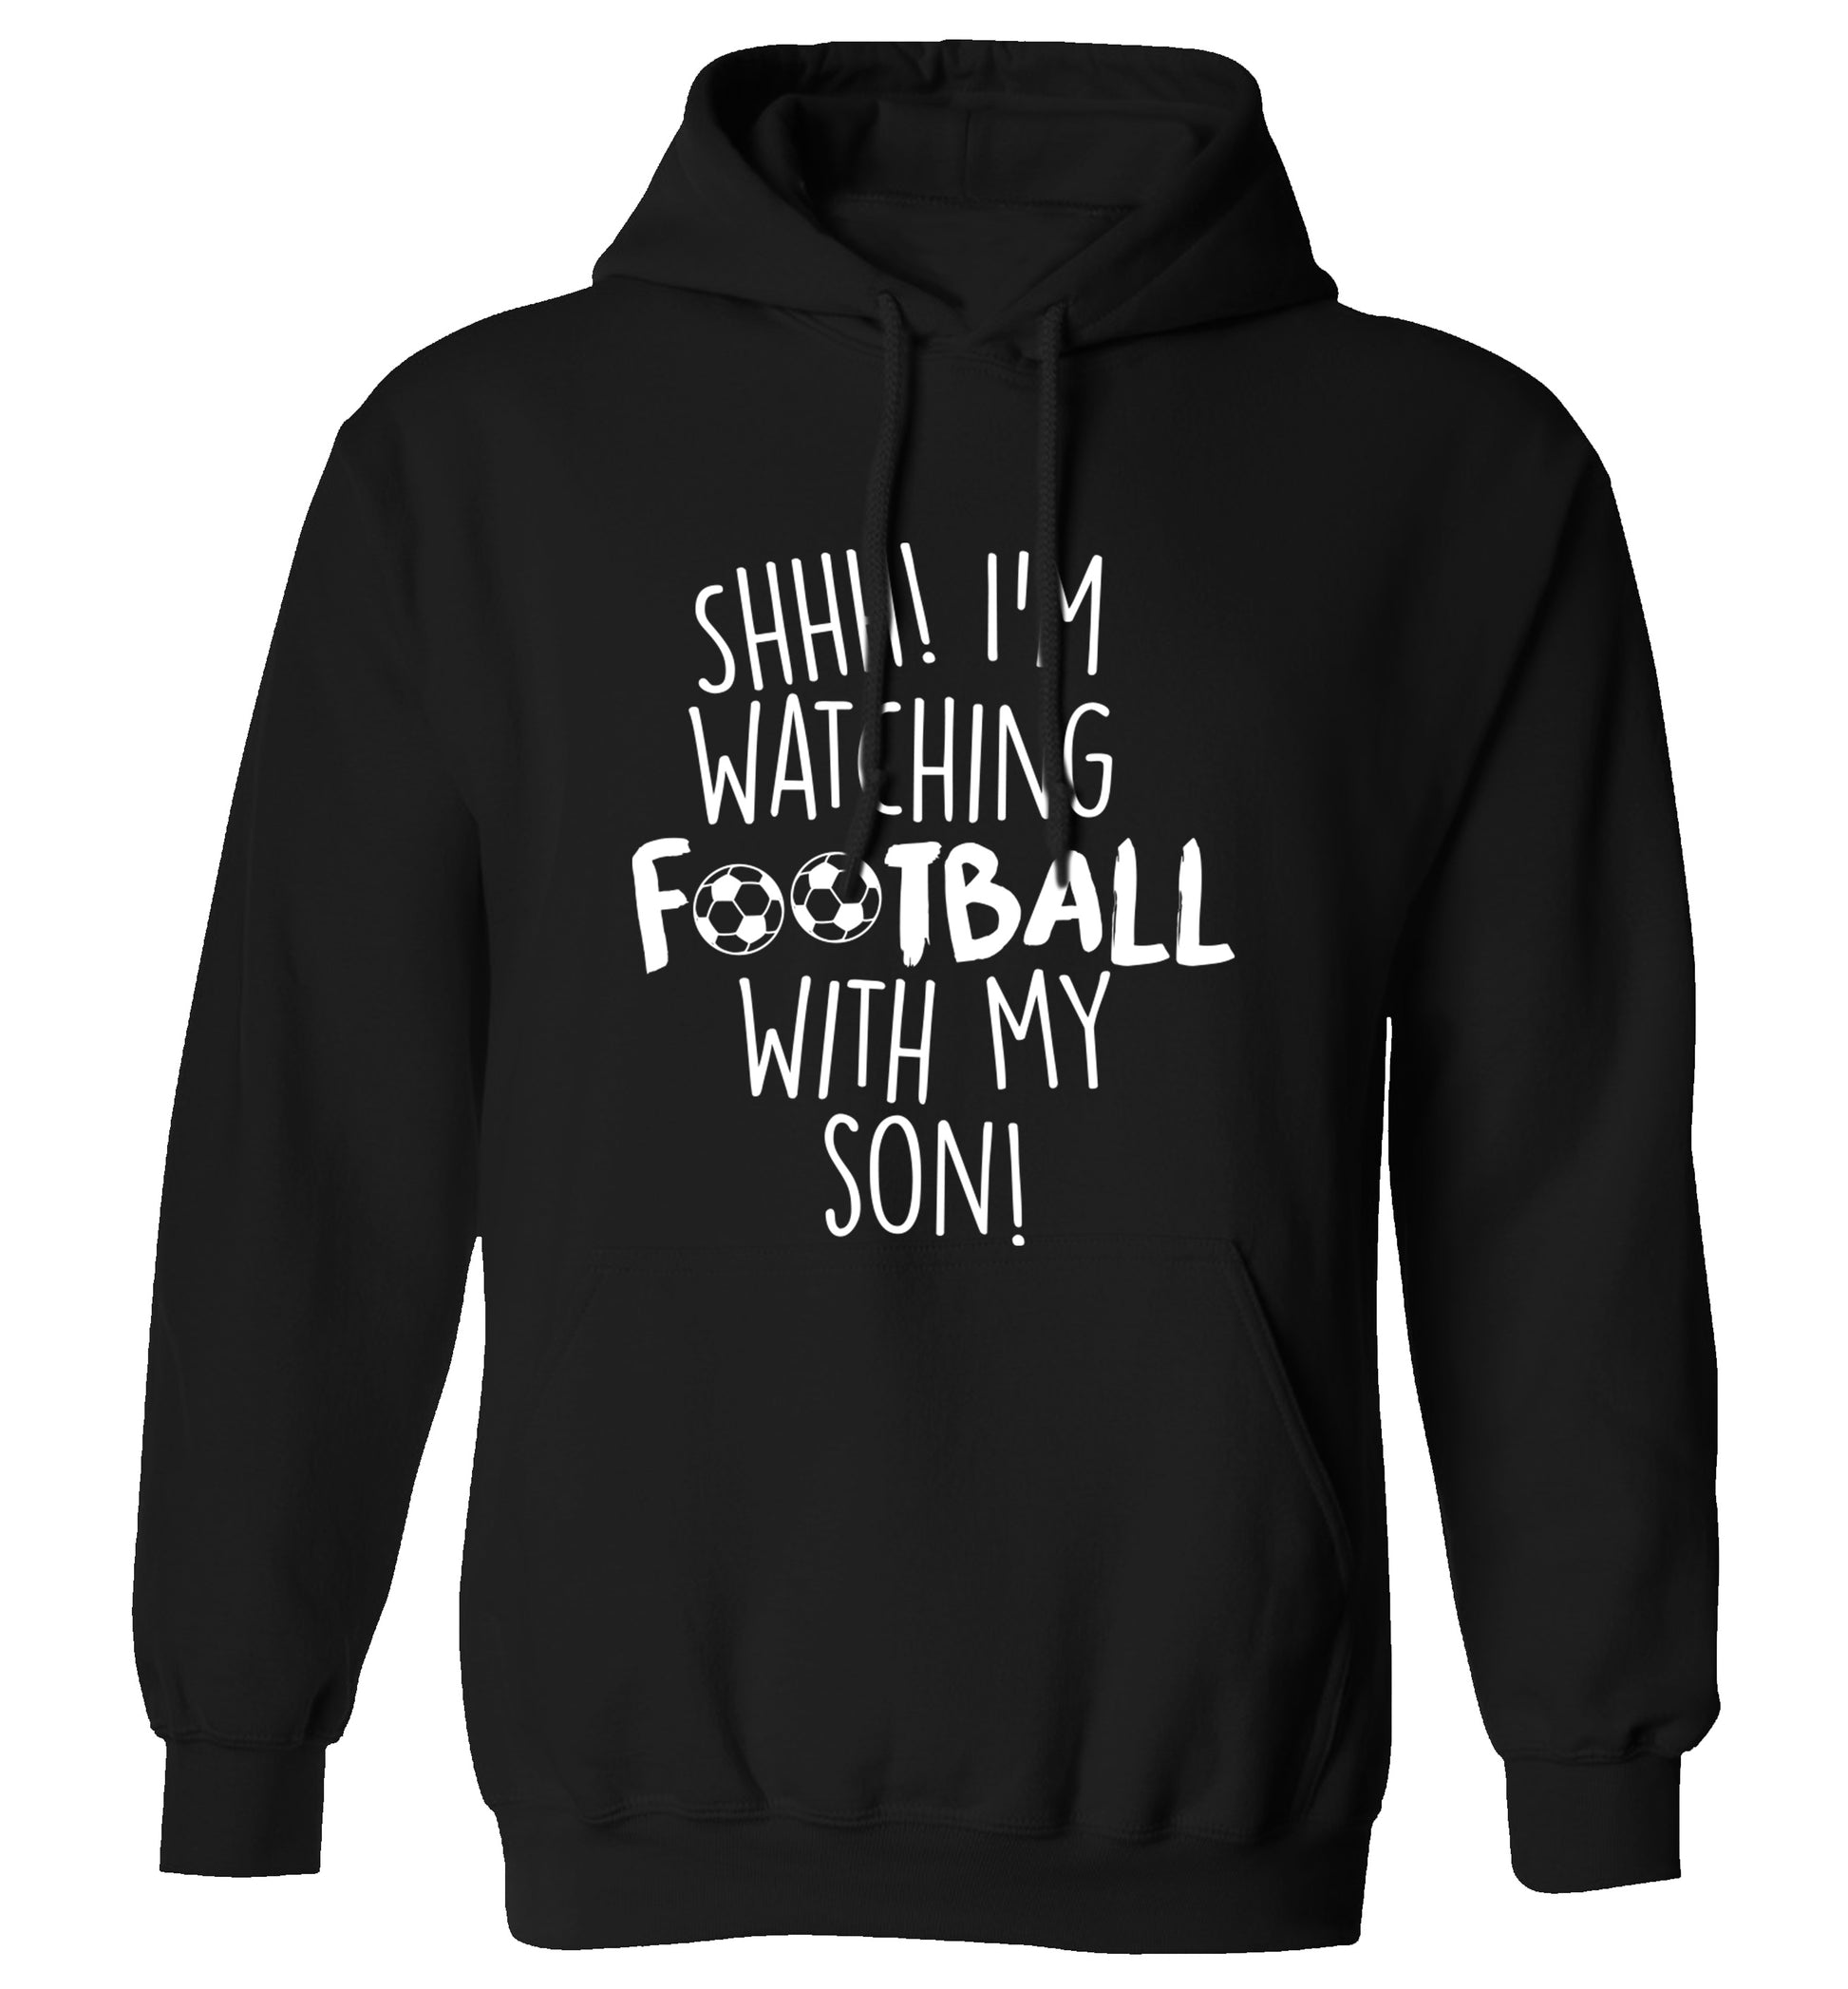 Shhh I'm watching football with my son adults unisexblack hoodie 2XL